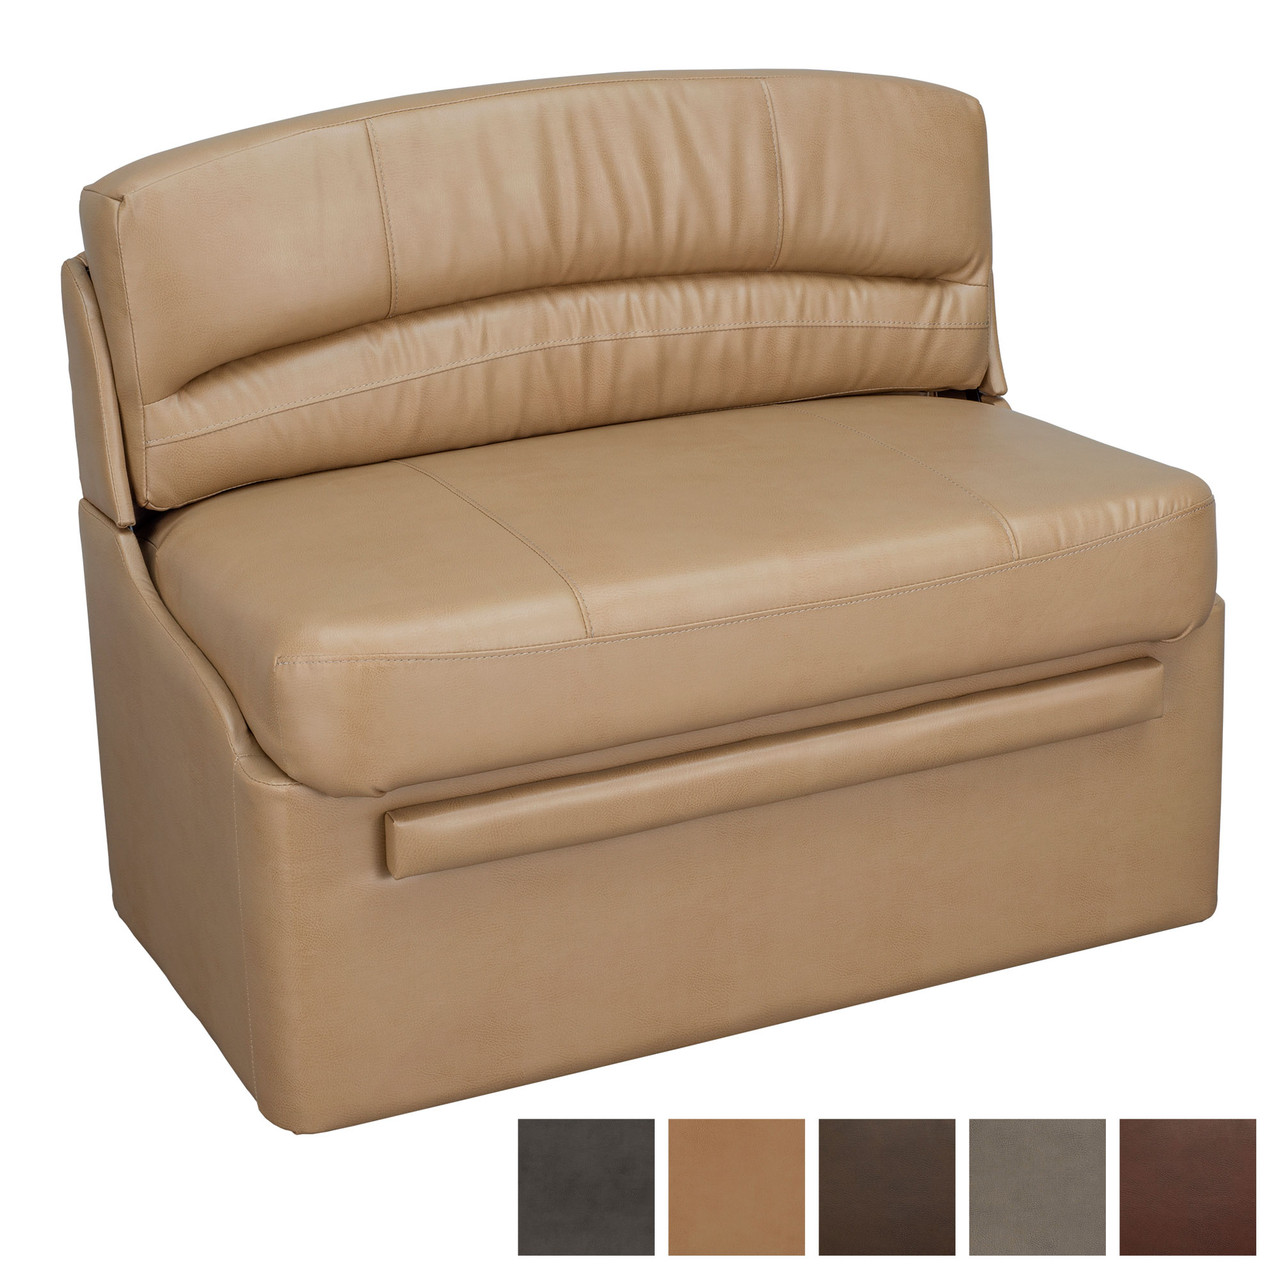 RecPro Charles RV Gaming Chair and Ottoman with Storage - RecPro